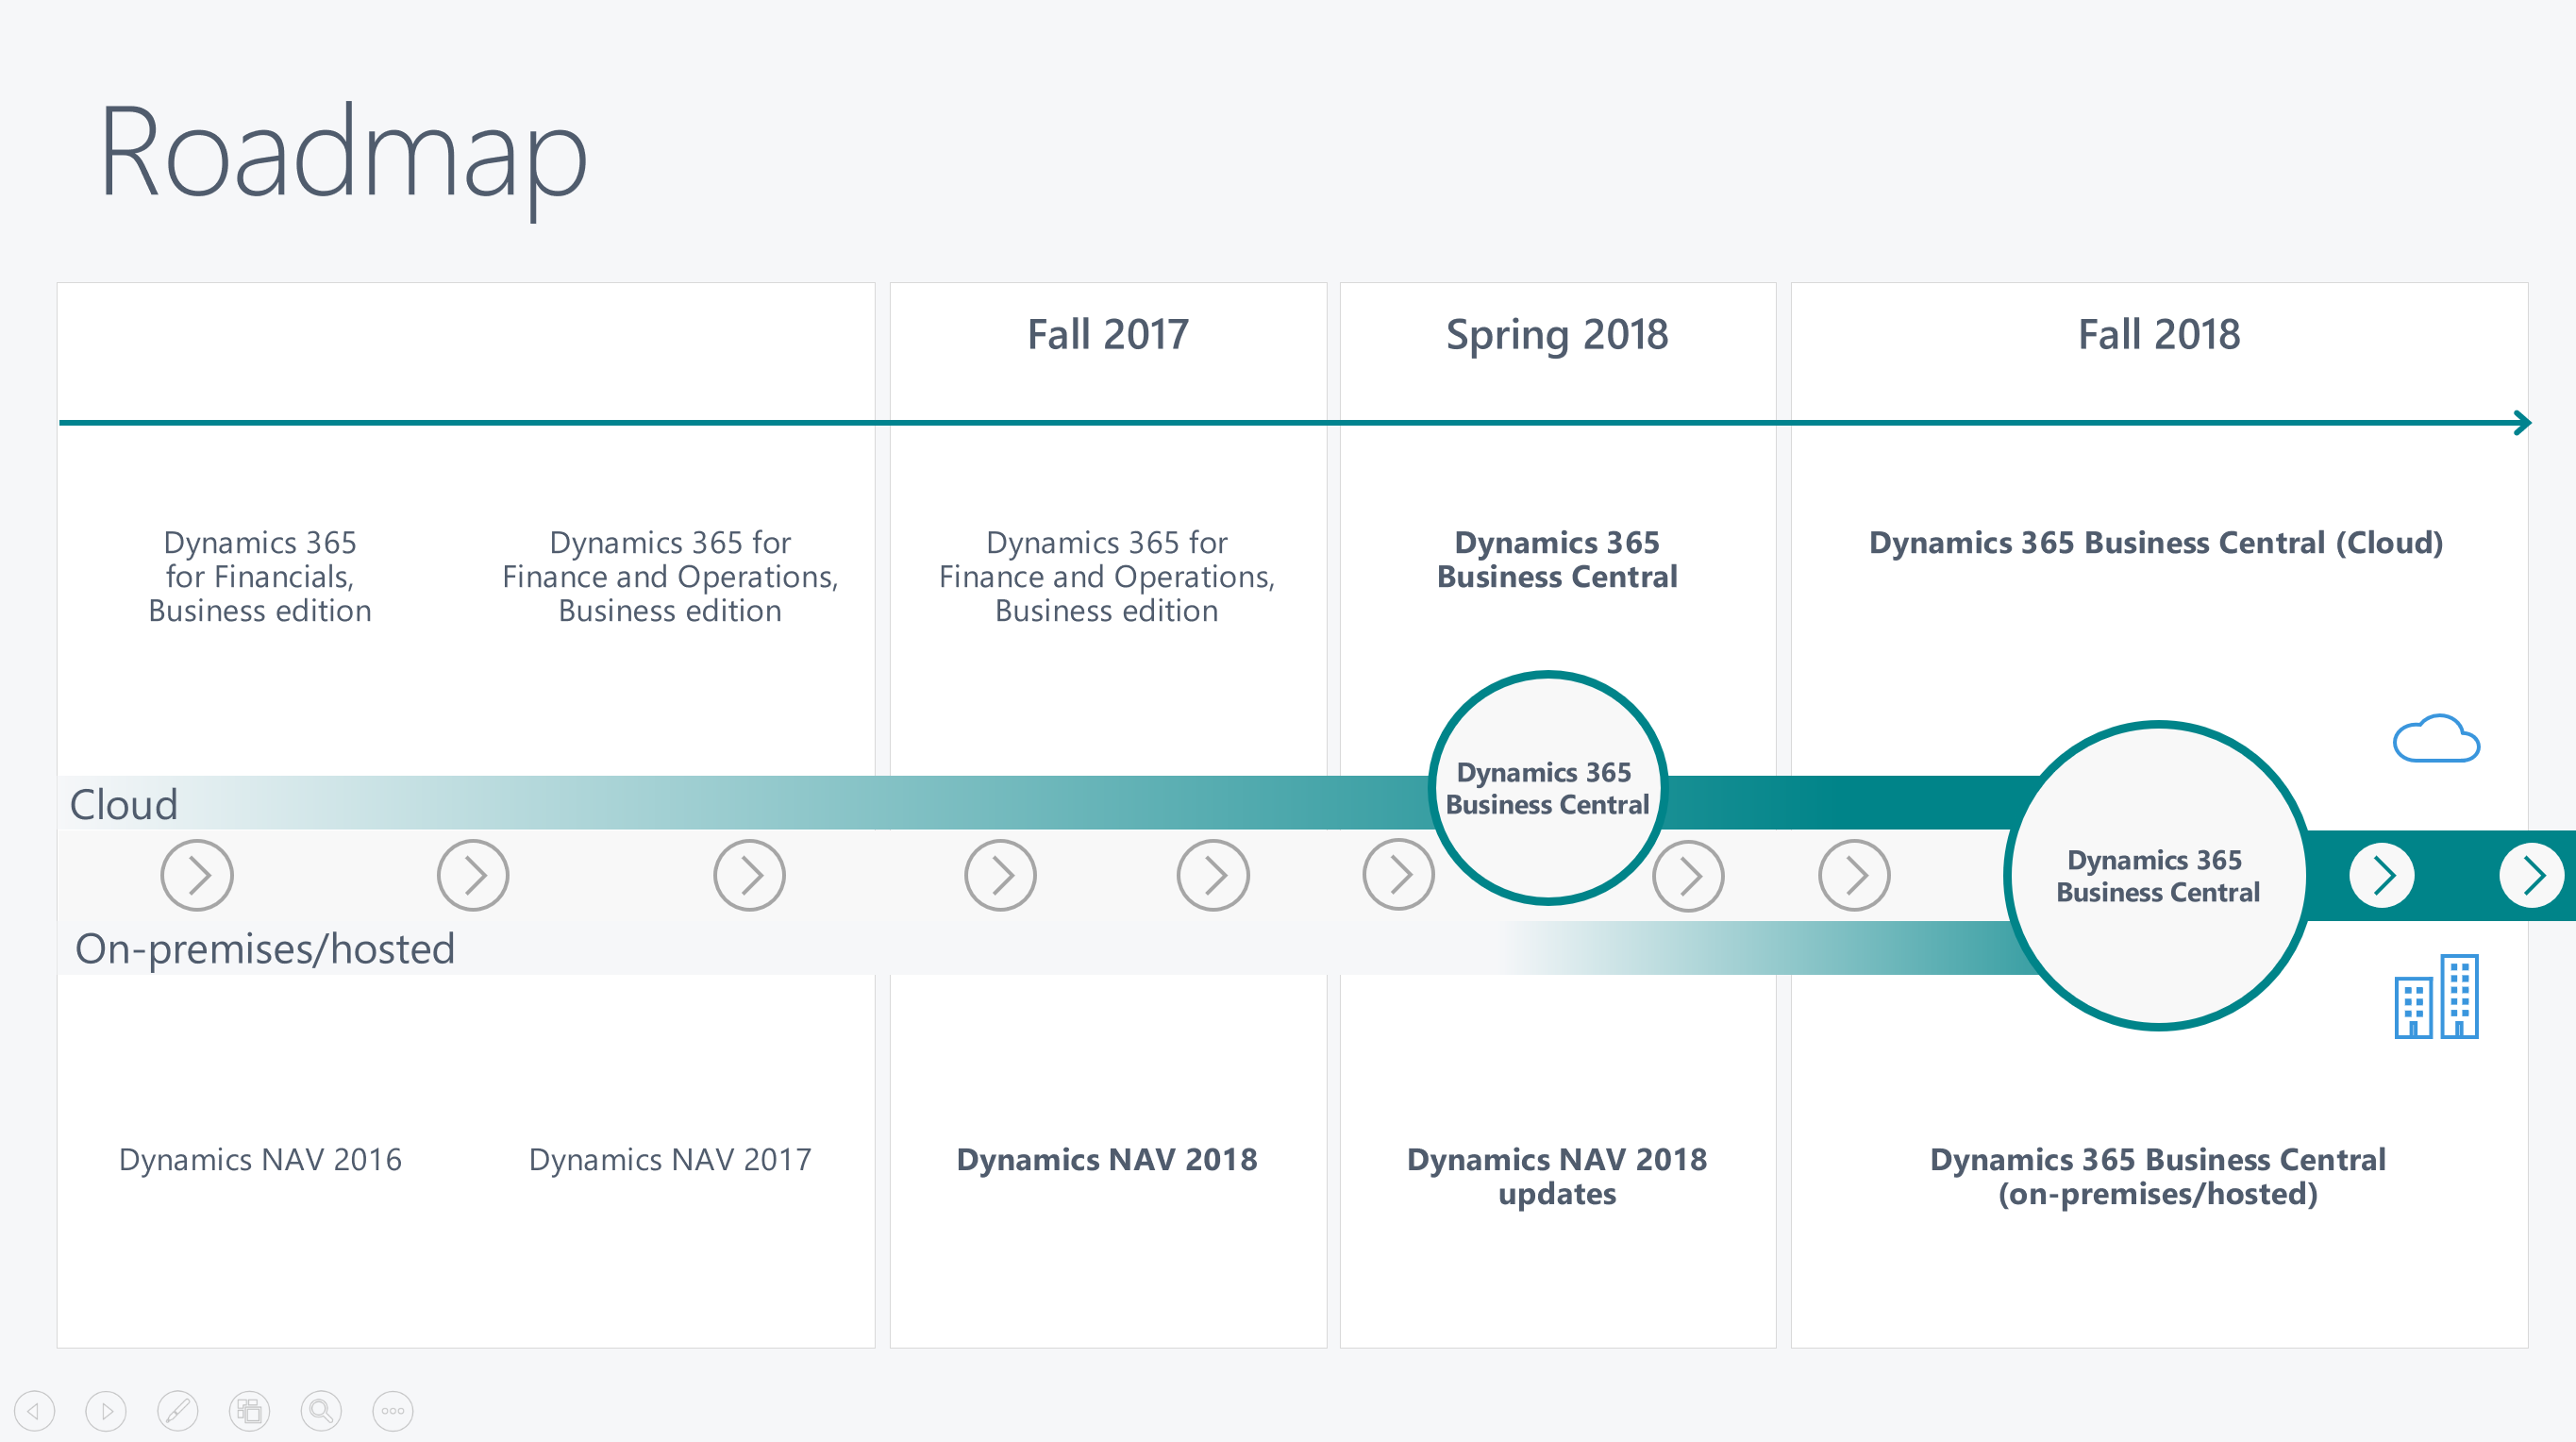 A roadmap shows the development of Dynamics 365 Business Central